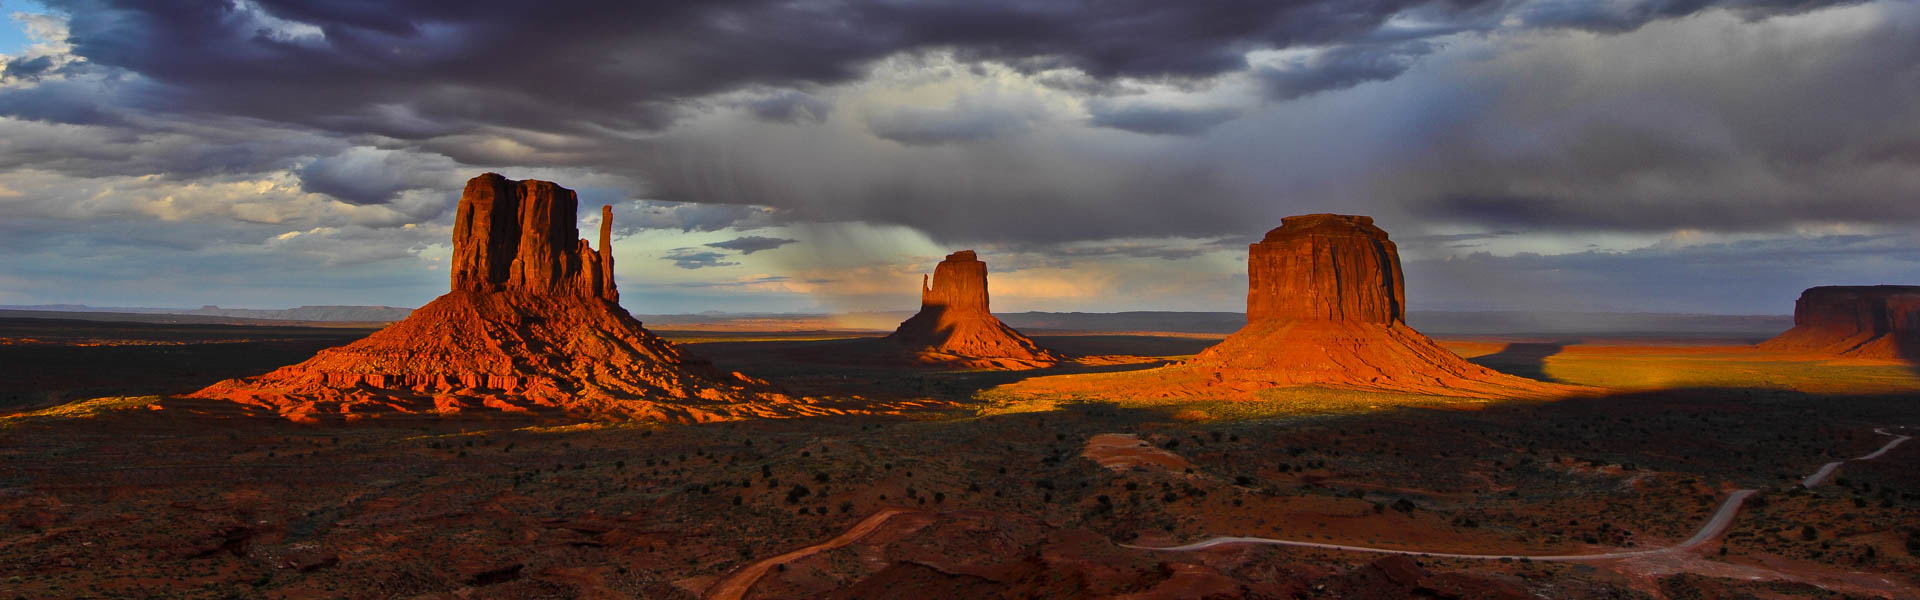 Sunset at Monument Valley, USA